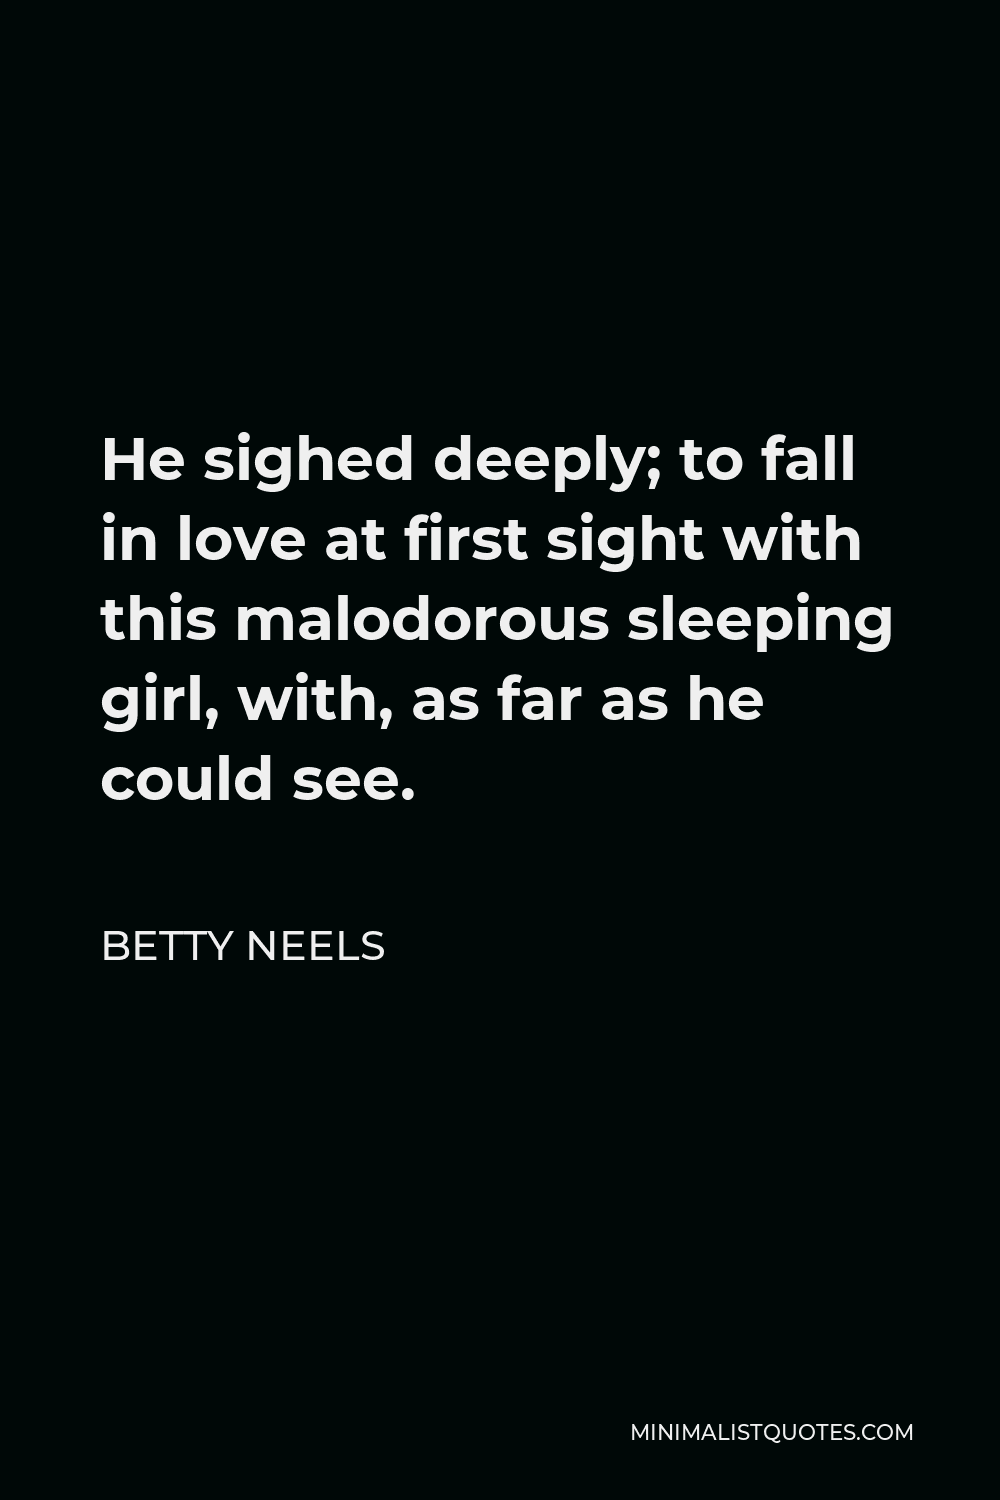 Betty Neels Quote - He sighed deeply; to fall in love at first sight with this malodorous sleeping girl, with, as far as he could see.